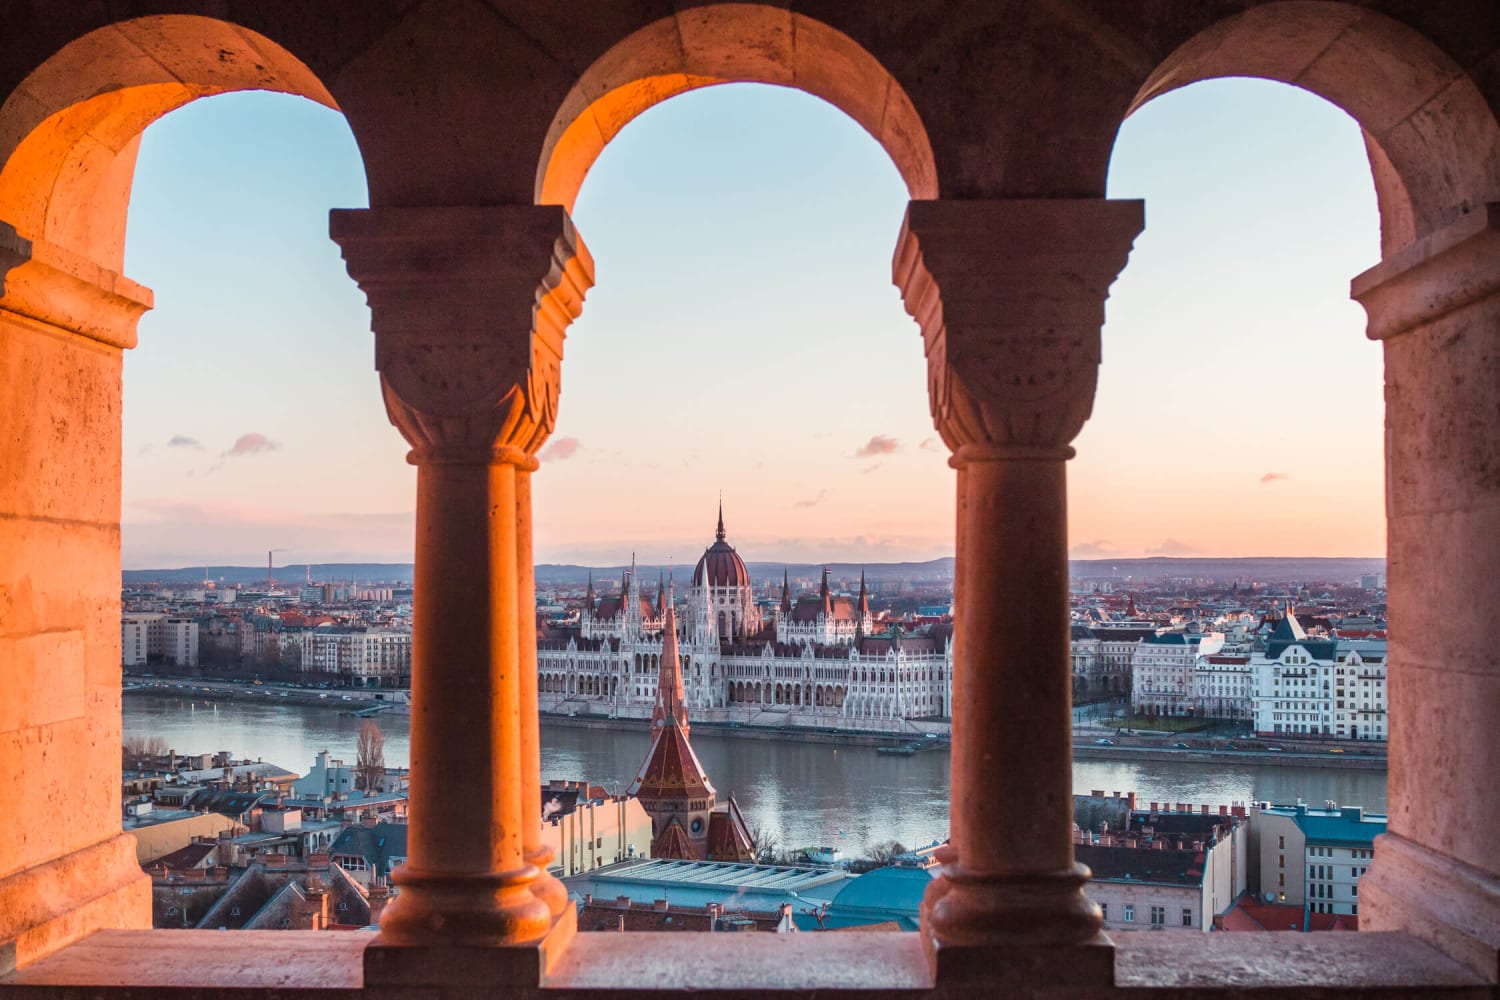 Budapest photography guide: 23 awesome things to see & do